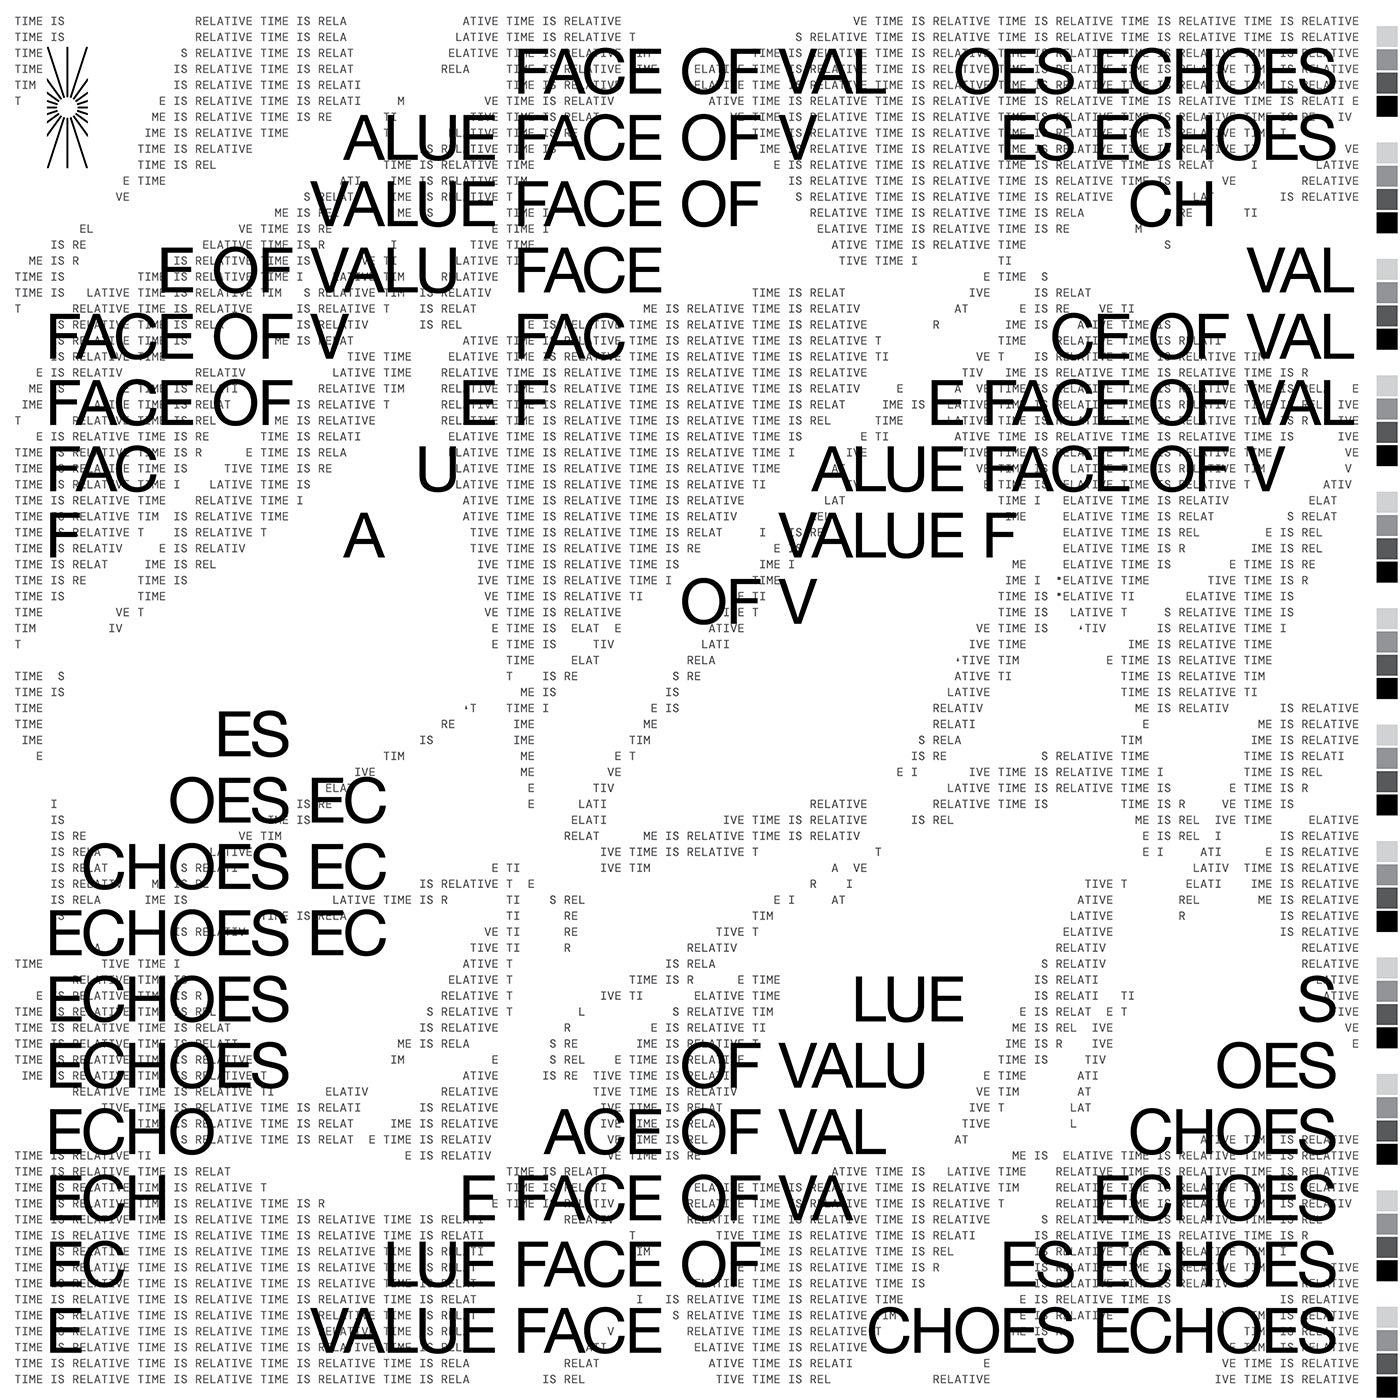 Echoes / Face of Value